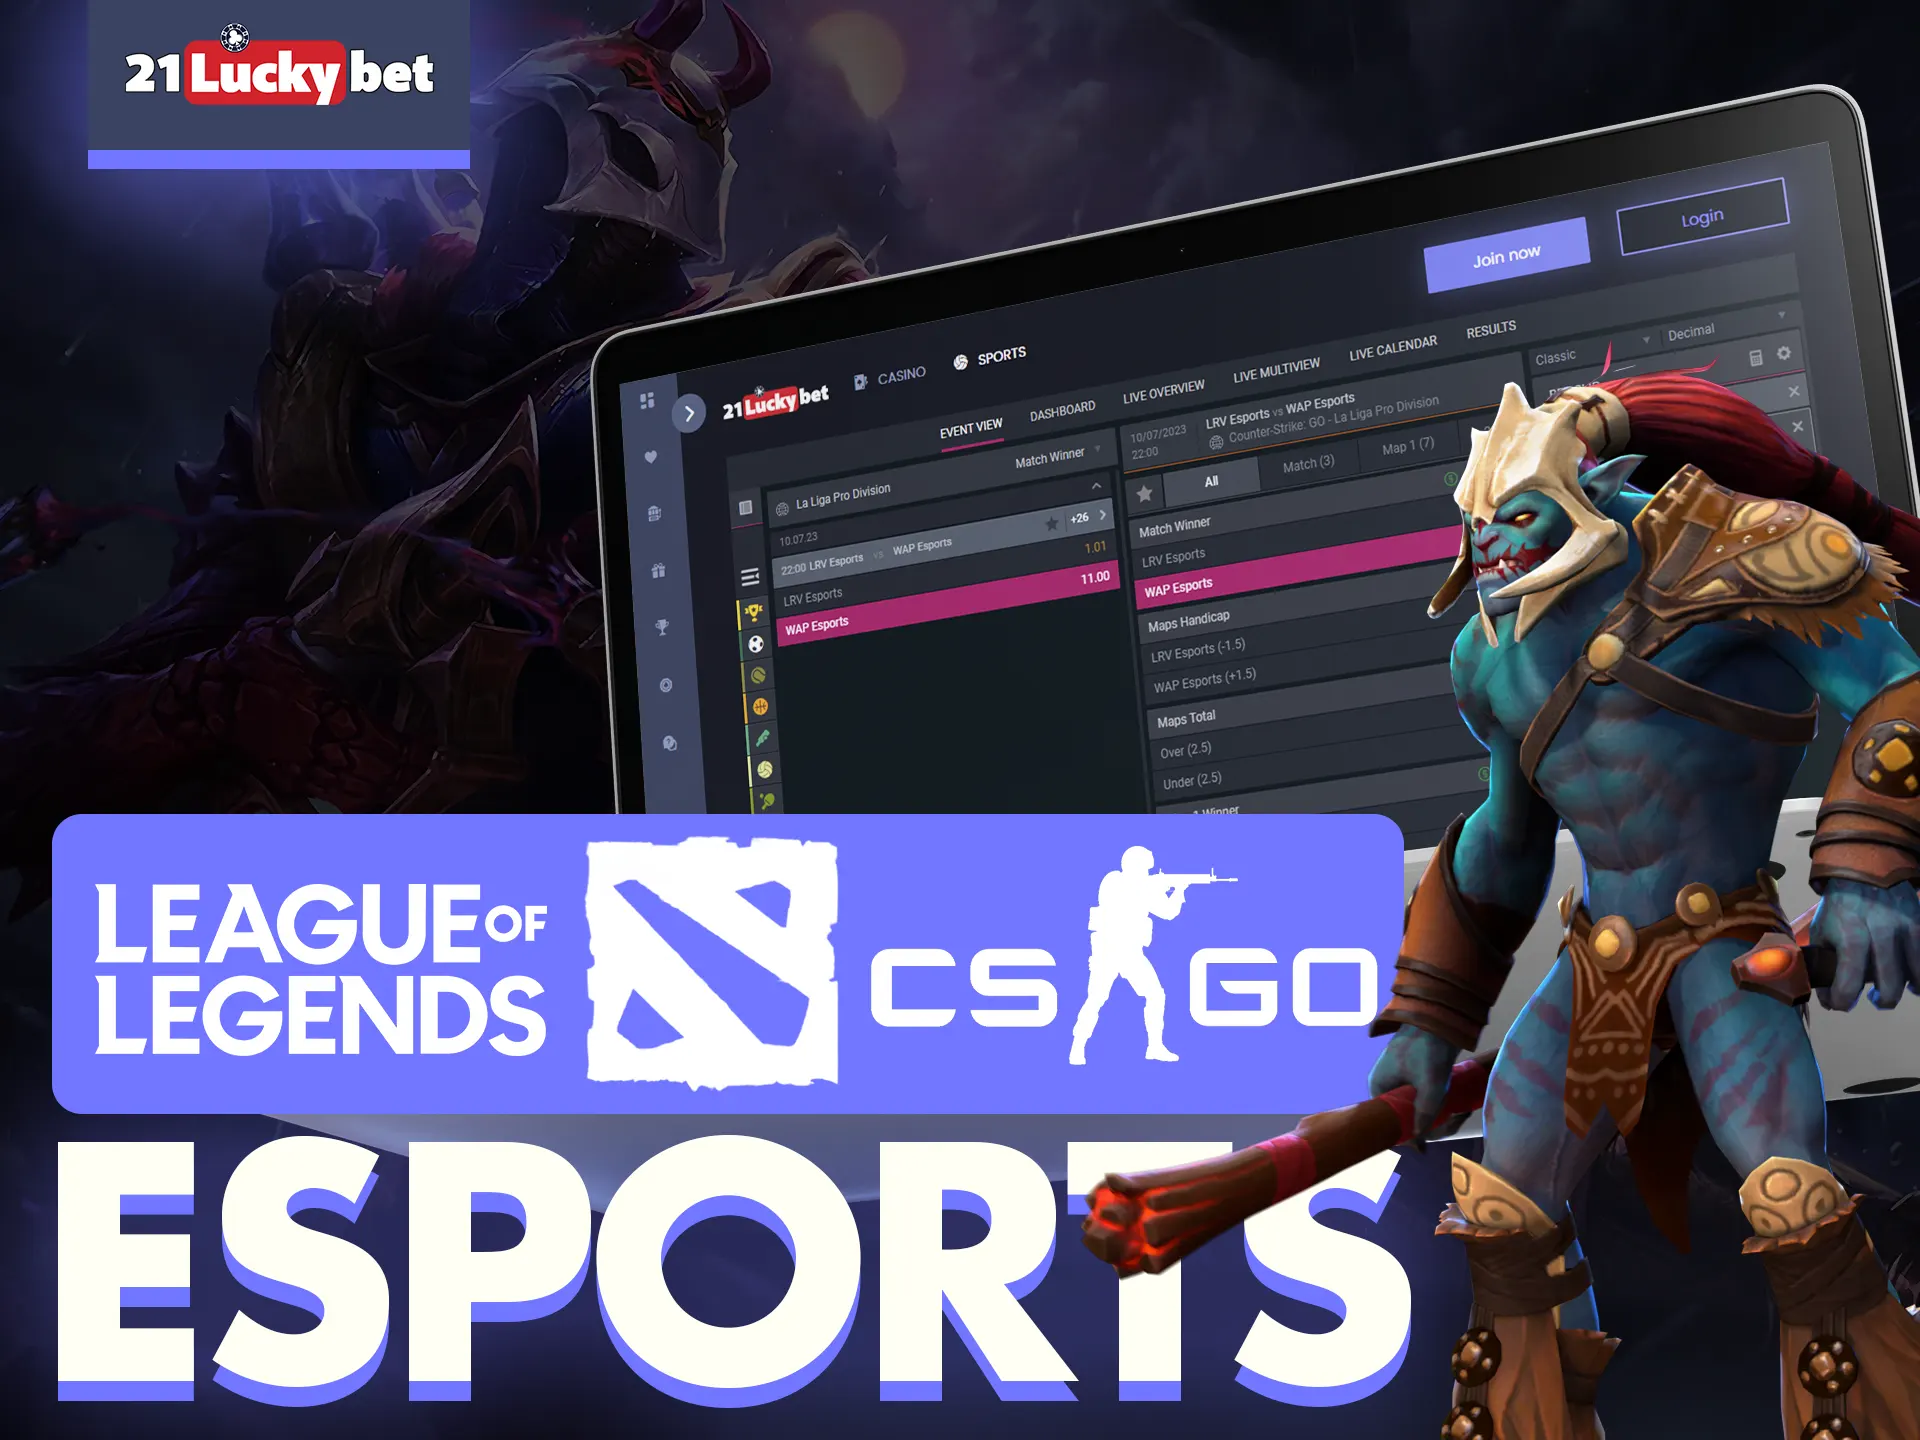 Place your bets on Esports with 21luckybet.